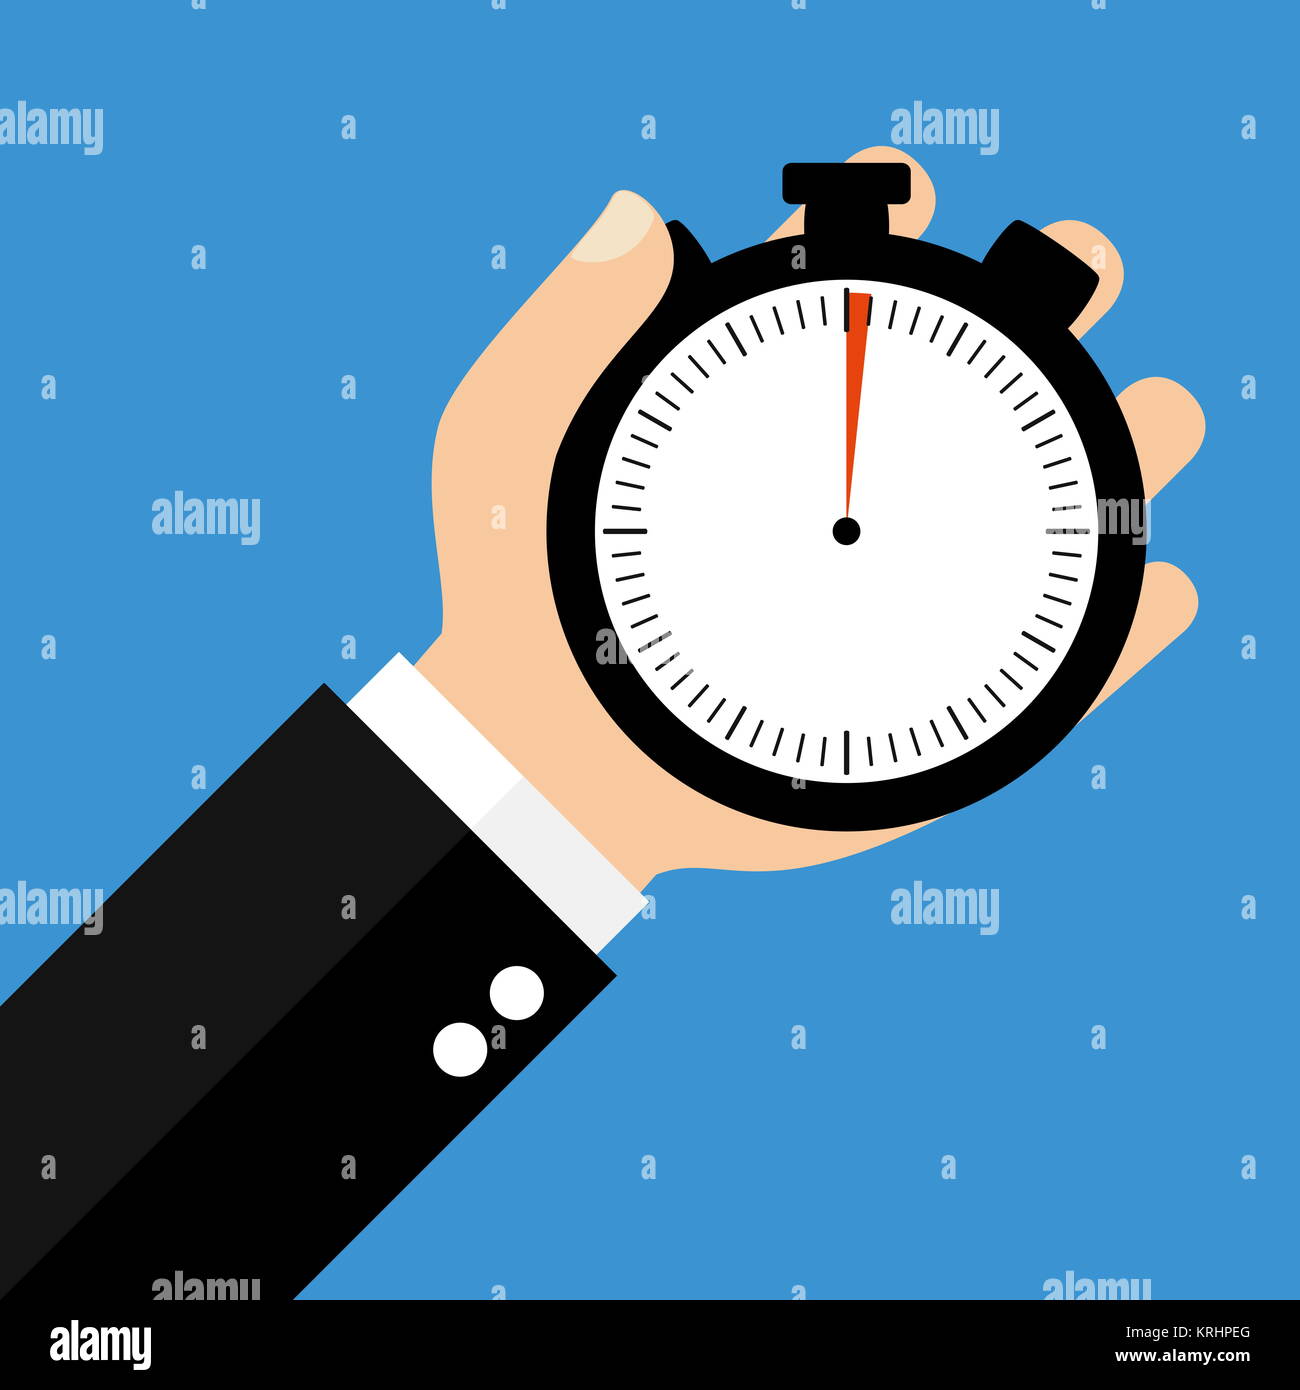 hand with stopwatch 1 second or 1 minute Stock Photo - Alamy